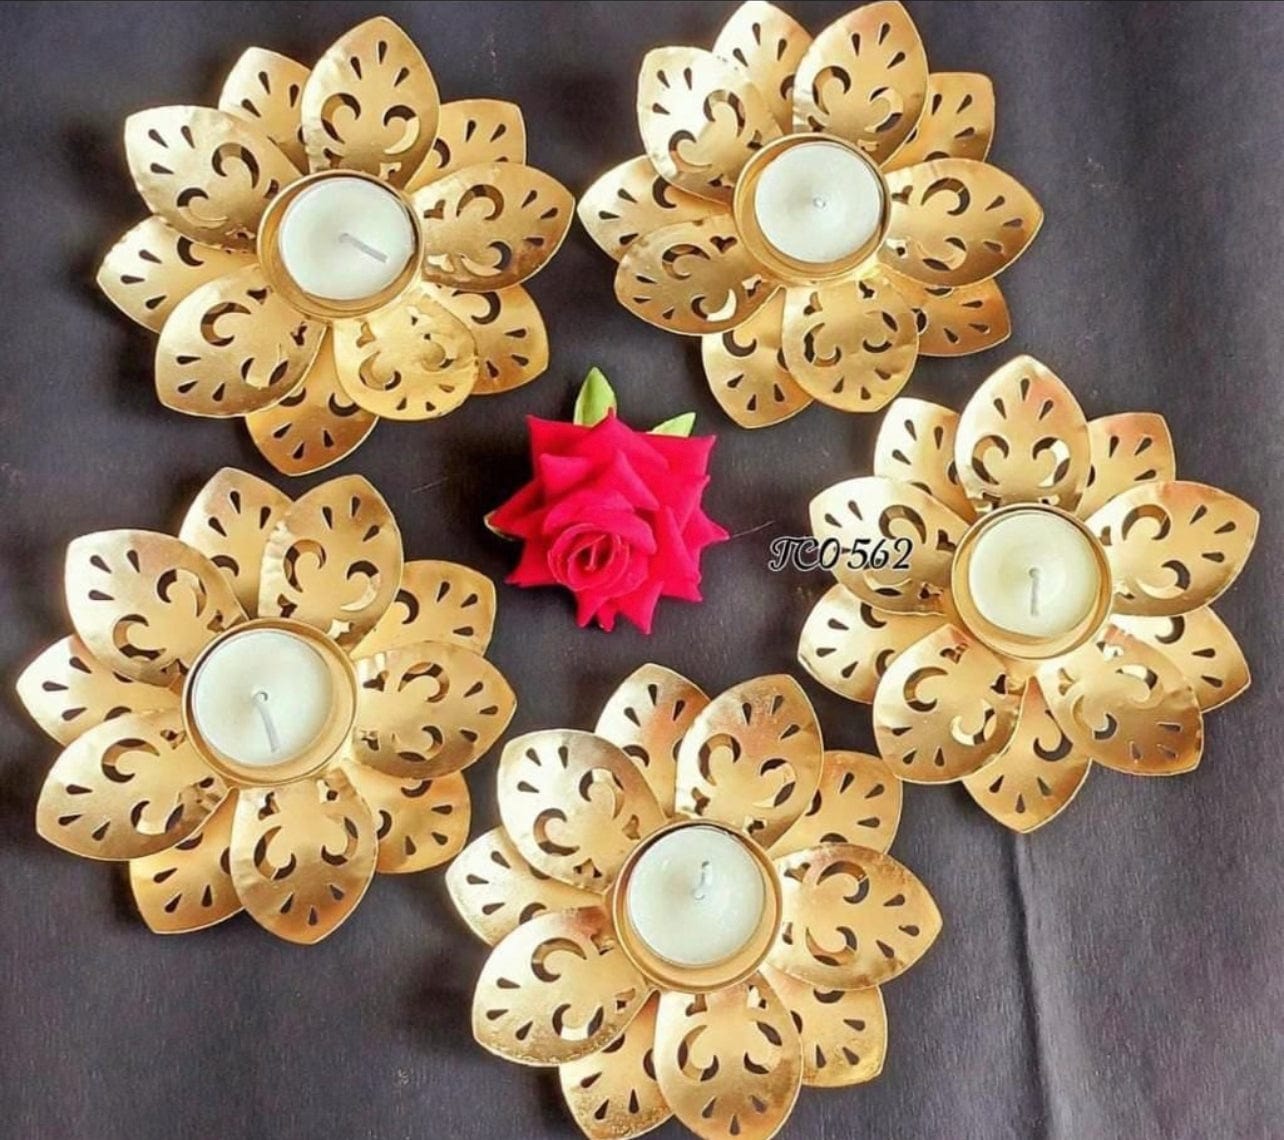 70 Rs each pc on buying 50+ qty | Whatsapp at 8619550223 candle holder LAMANSH Metal Lotus Diya stand | Floral shape golden candle 🕯️holder for diwali & Navratri decor / Return gifting 🎁